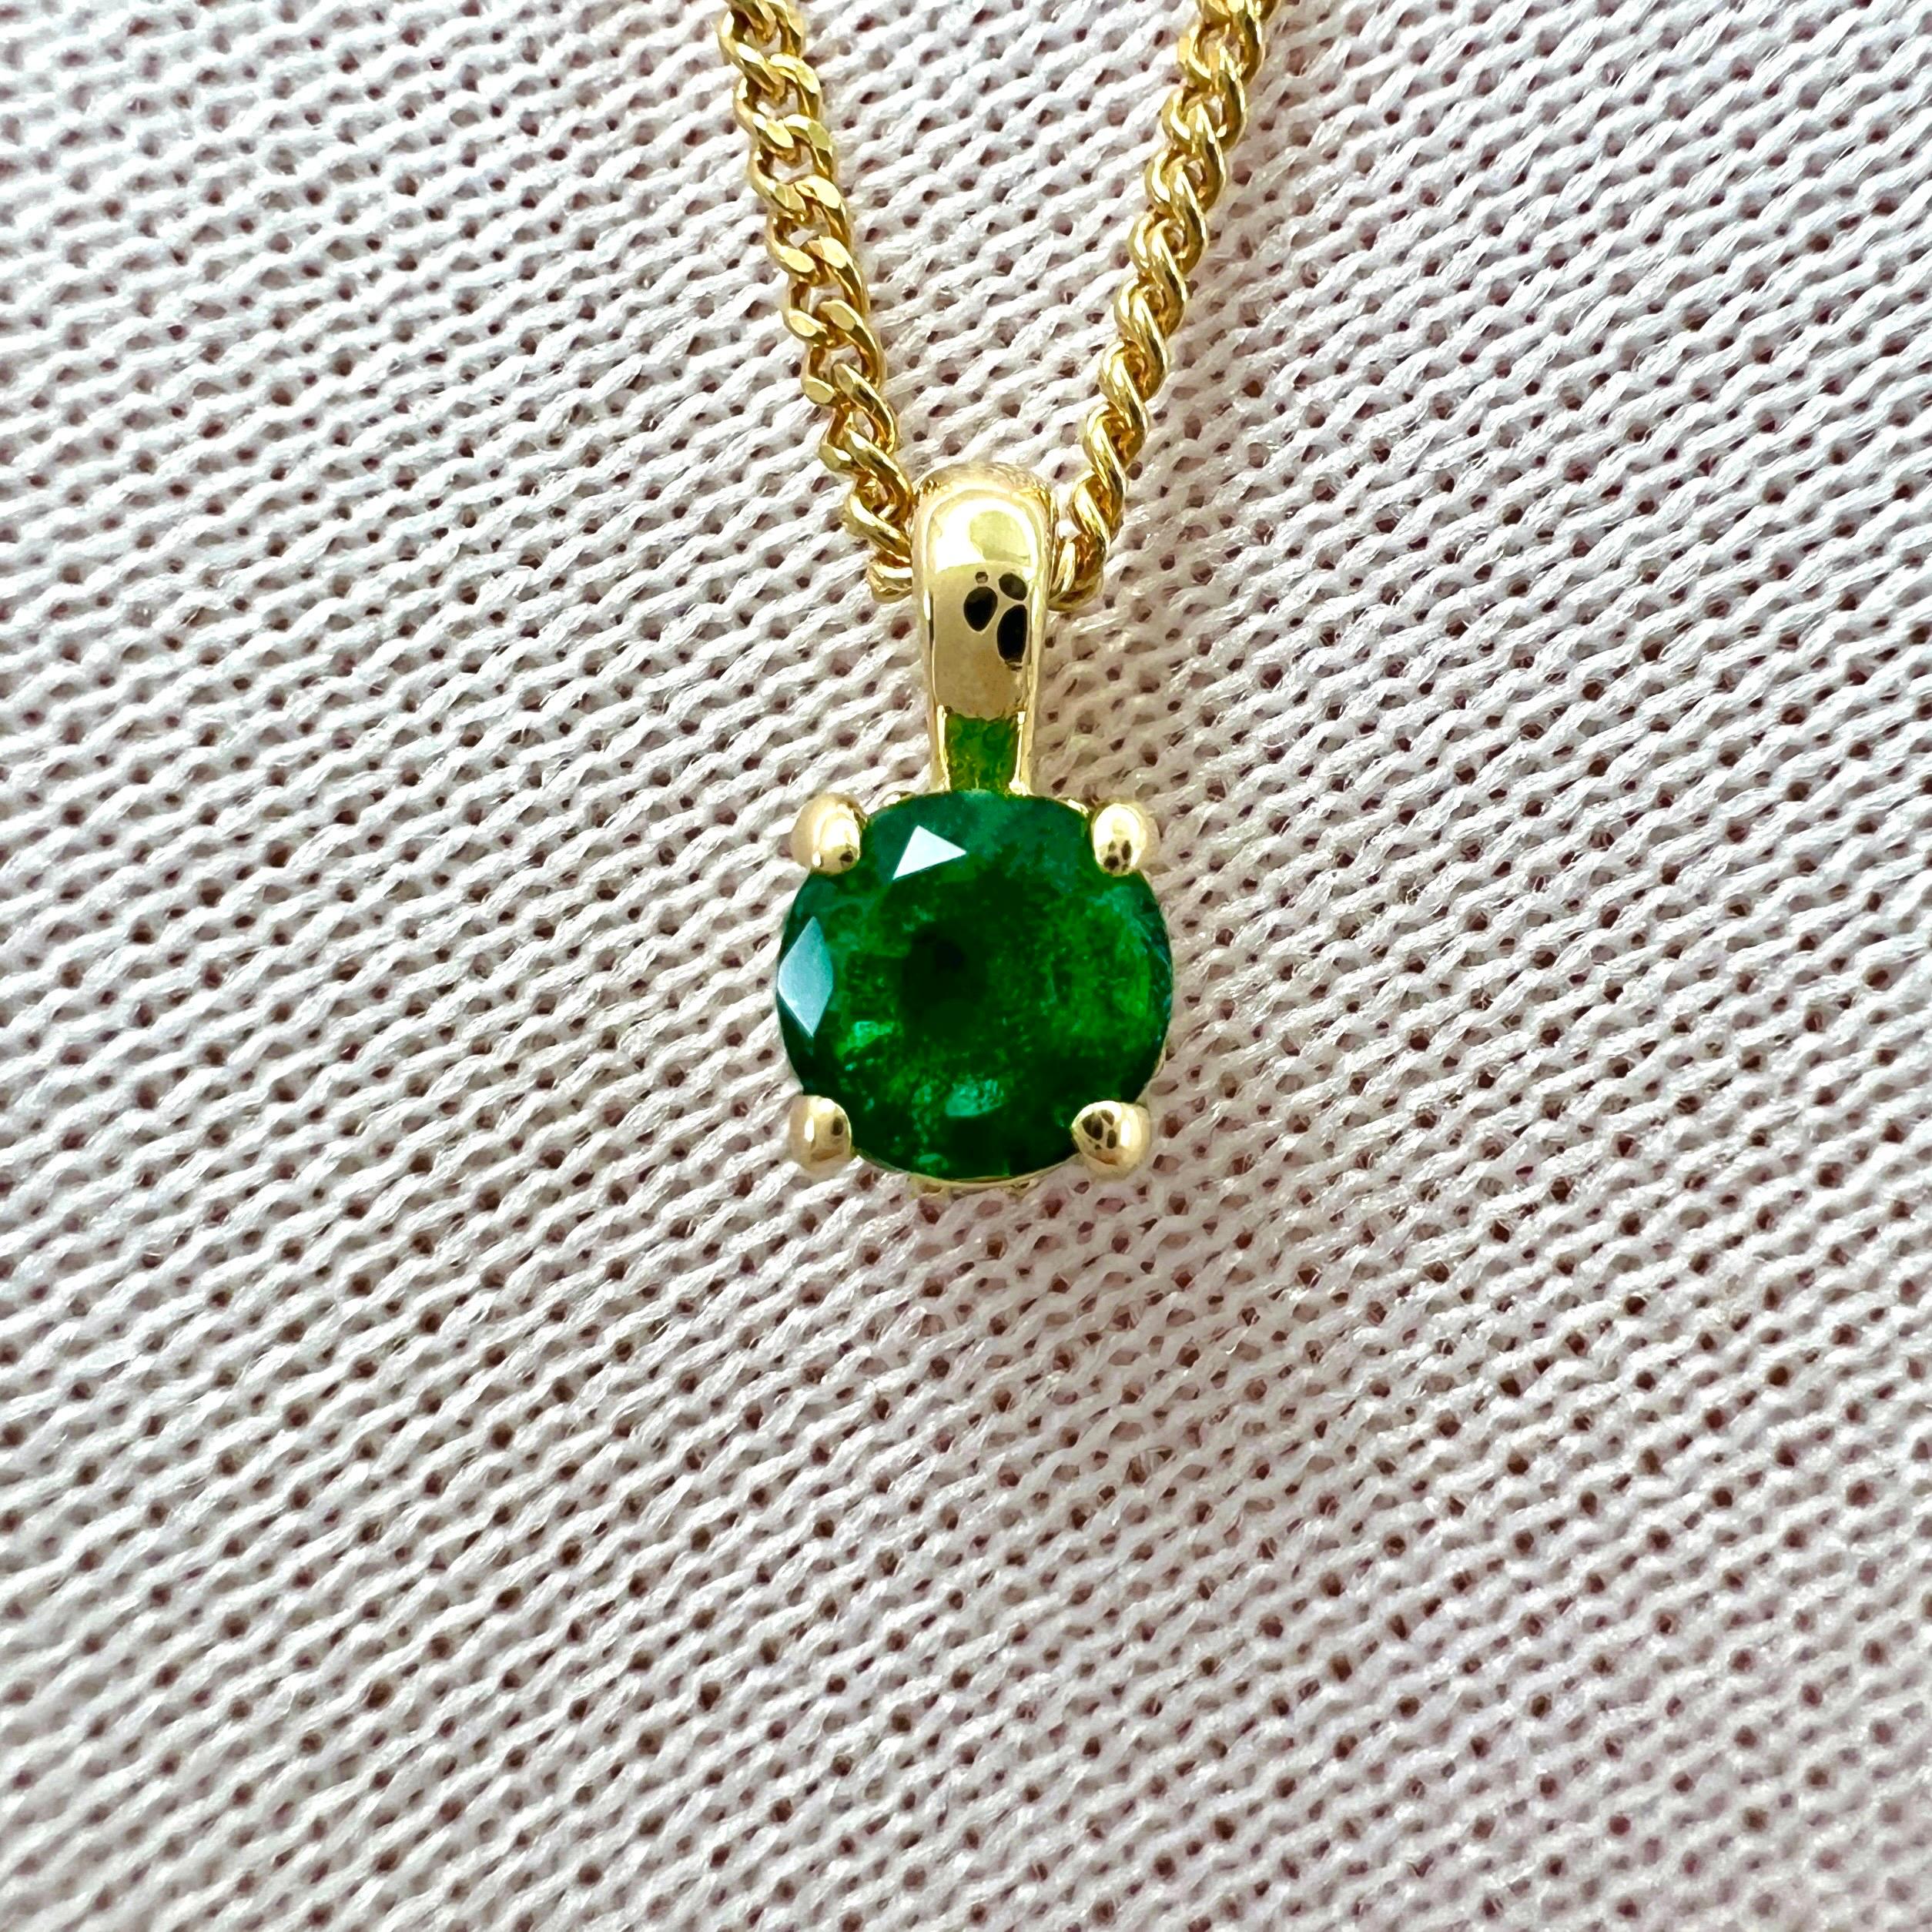 Fine Natural Vivid Green Round Cut Emerald & Diamond 18k Yellow Gold Hidden Halo Pendant Necklace.

This pendant is set with a beautiful 4mm natural emerald with a bright vivid green colour and very good clarity. A very clean stone with only some